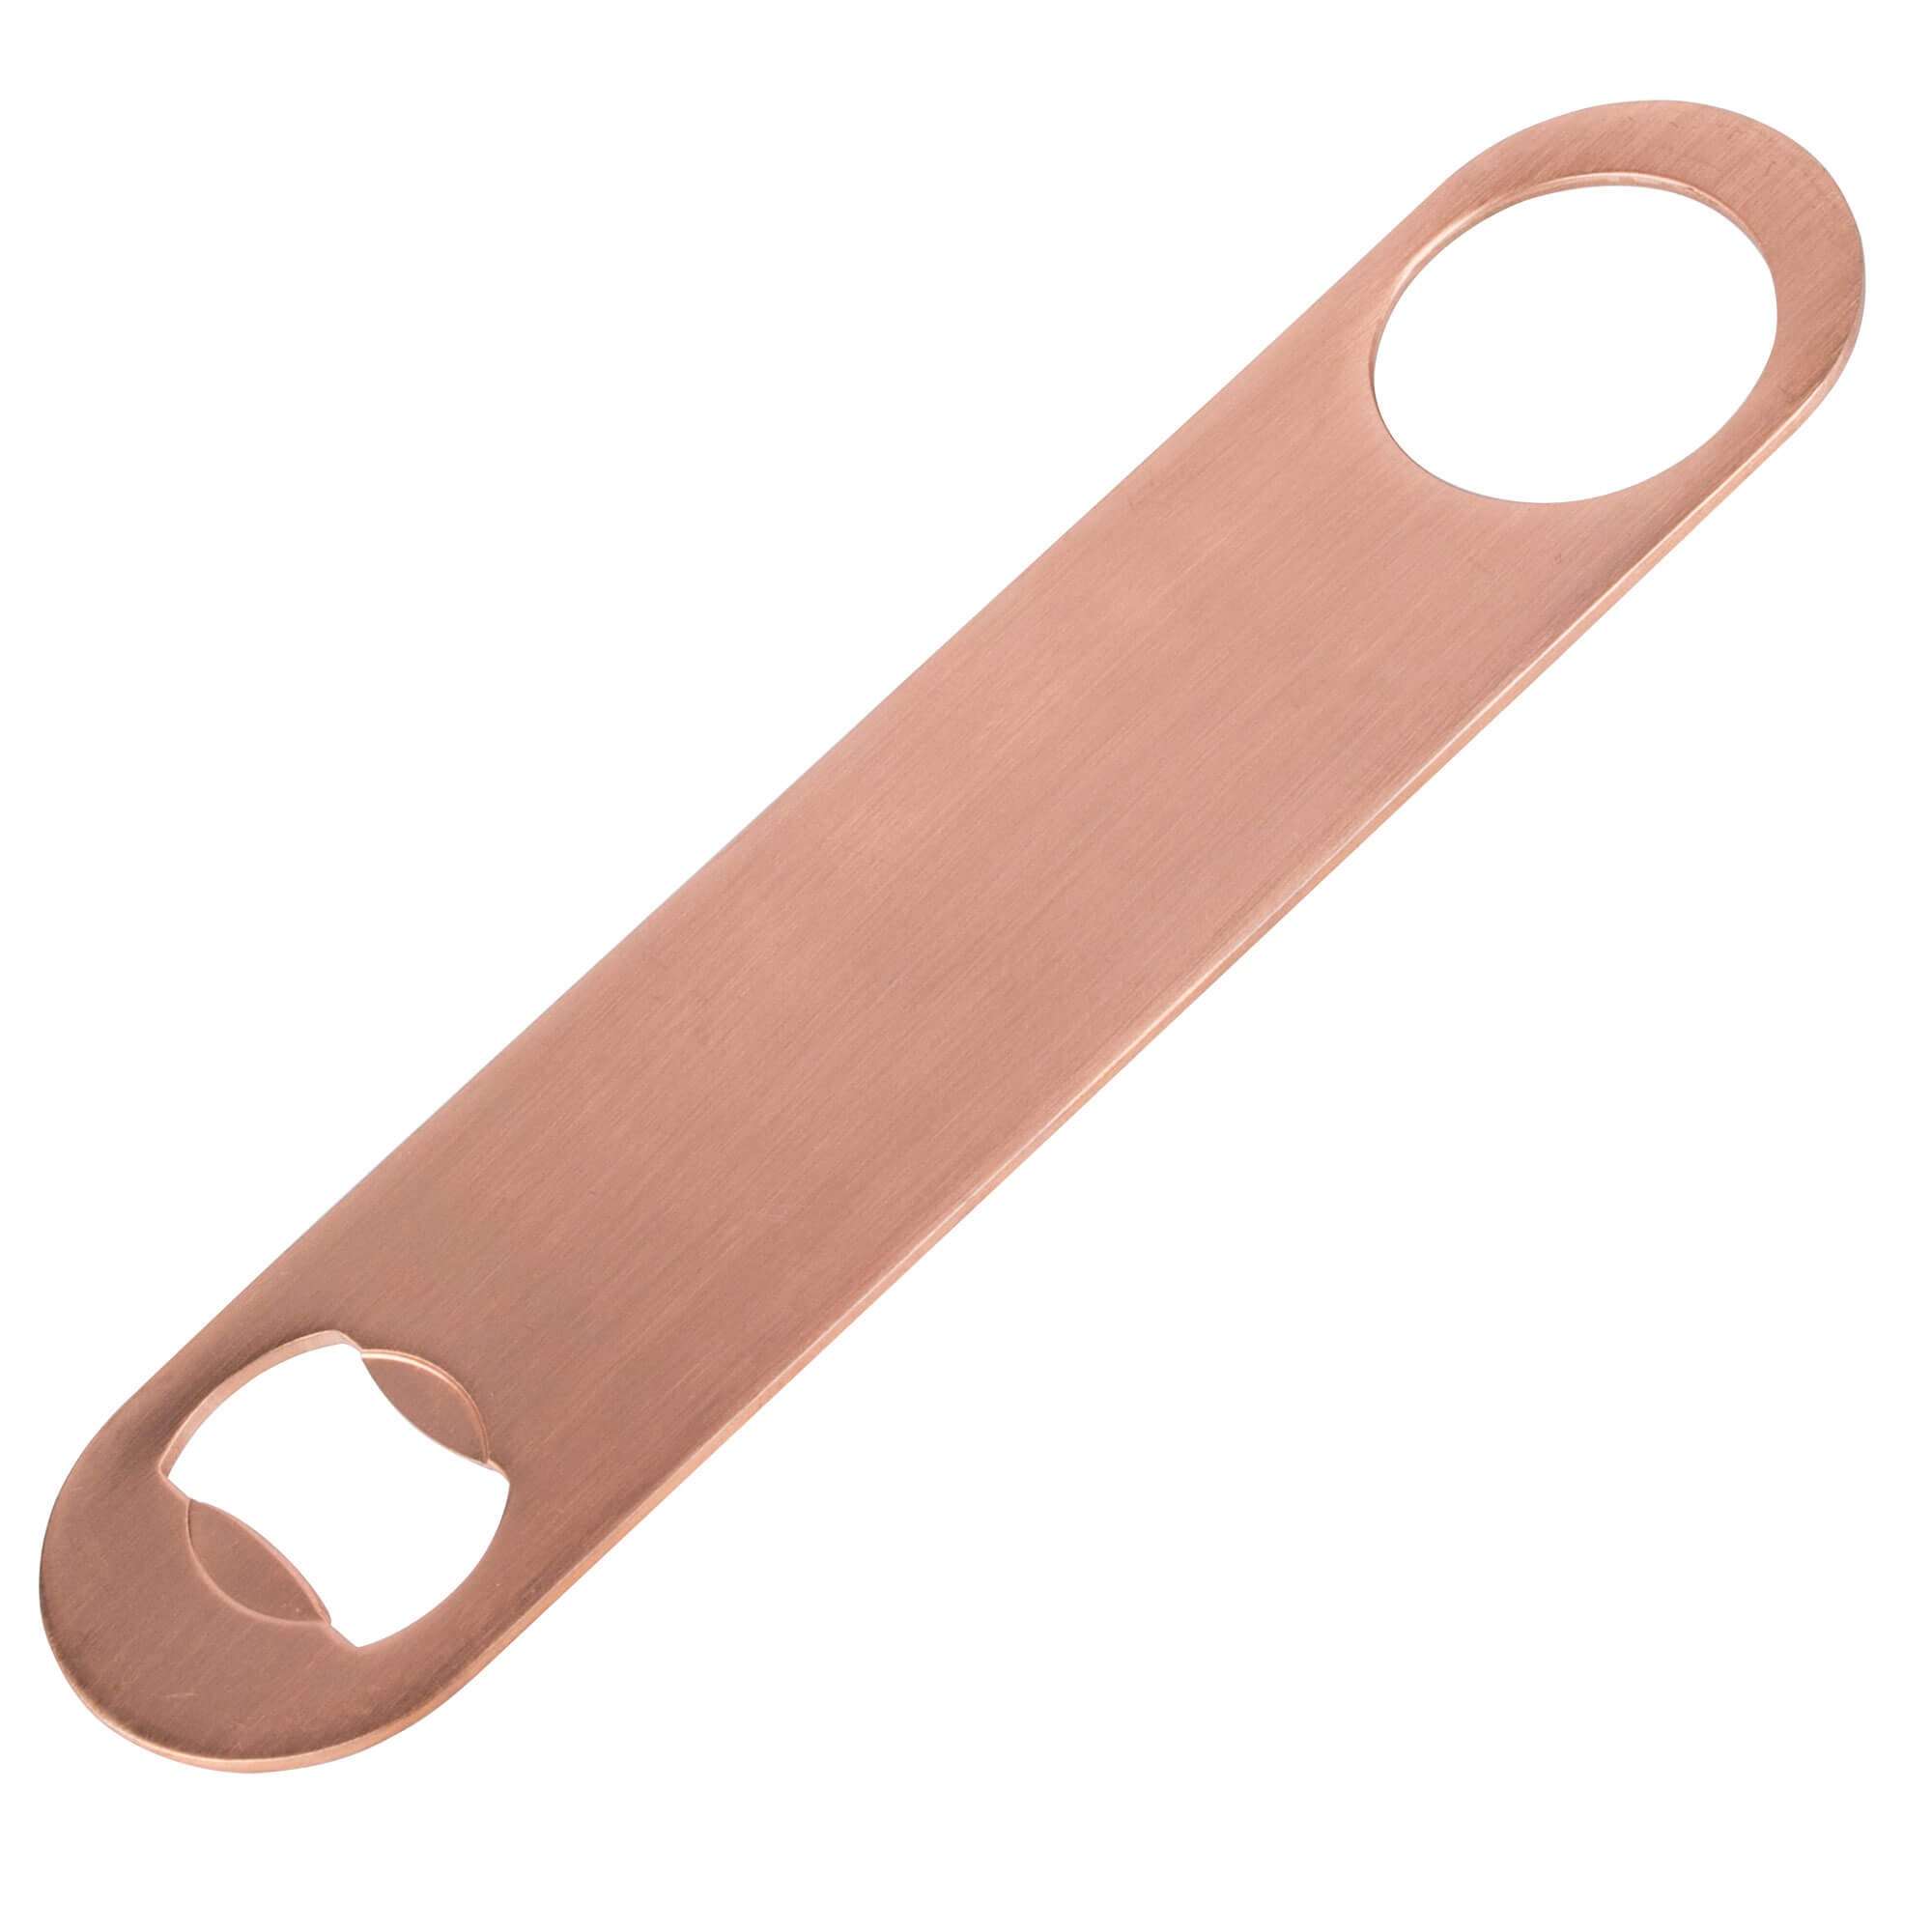 Speed opener - copper-colored